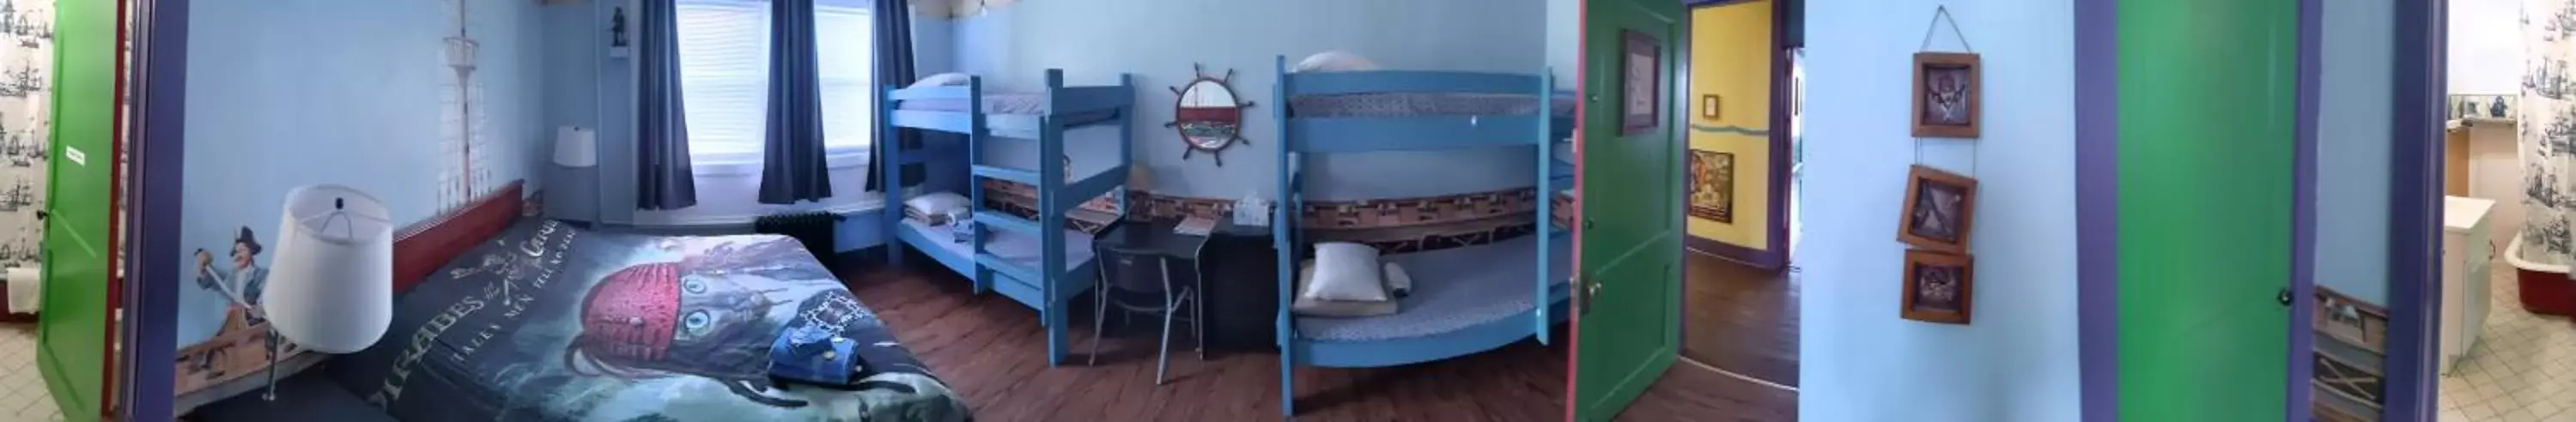 Bed in The Pirate Haus Inn